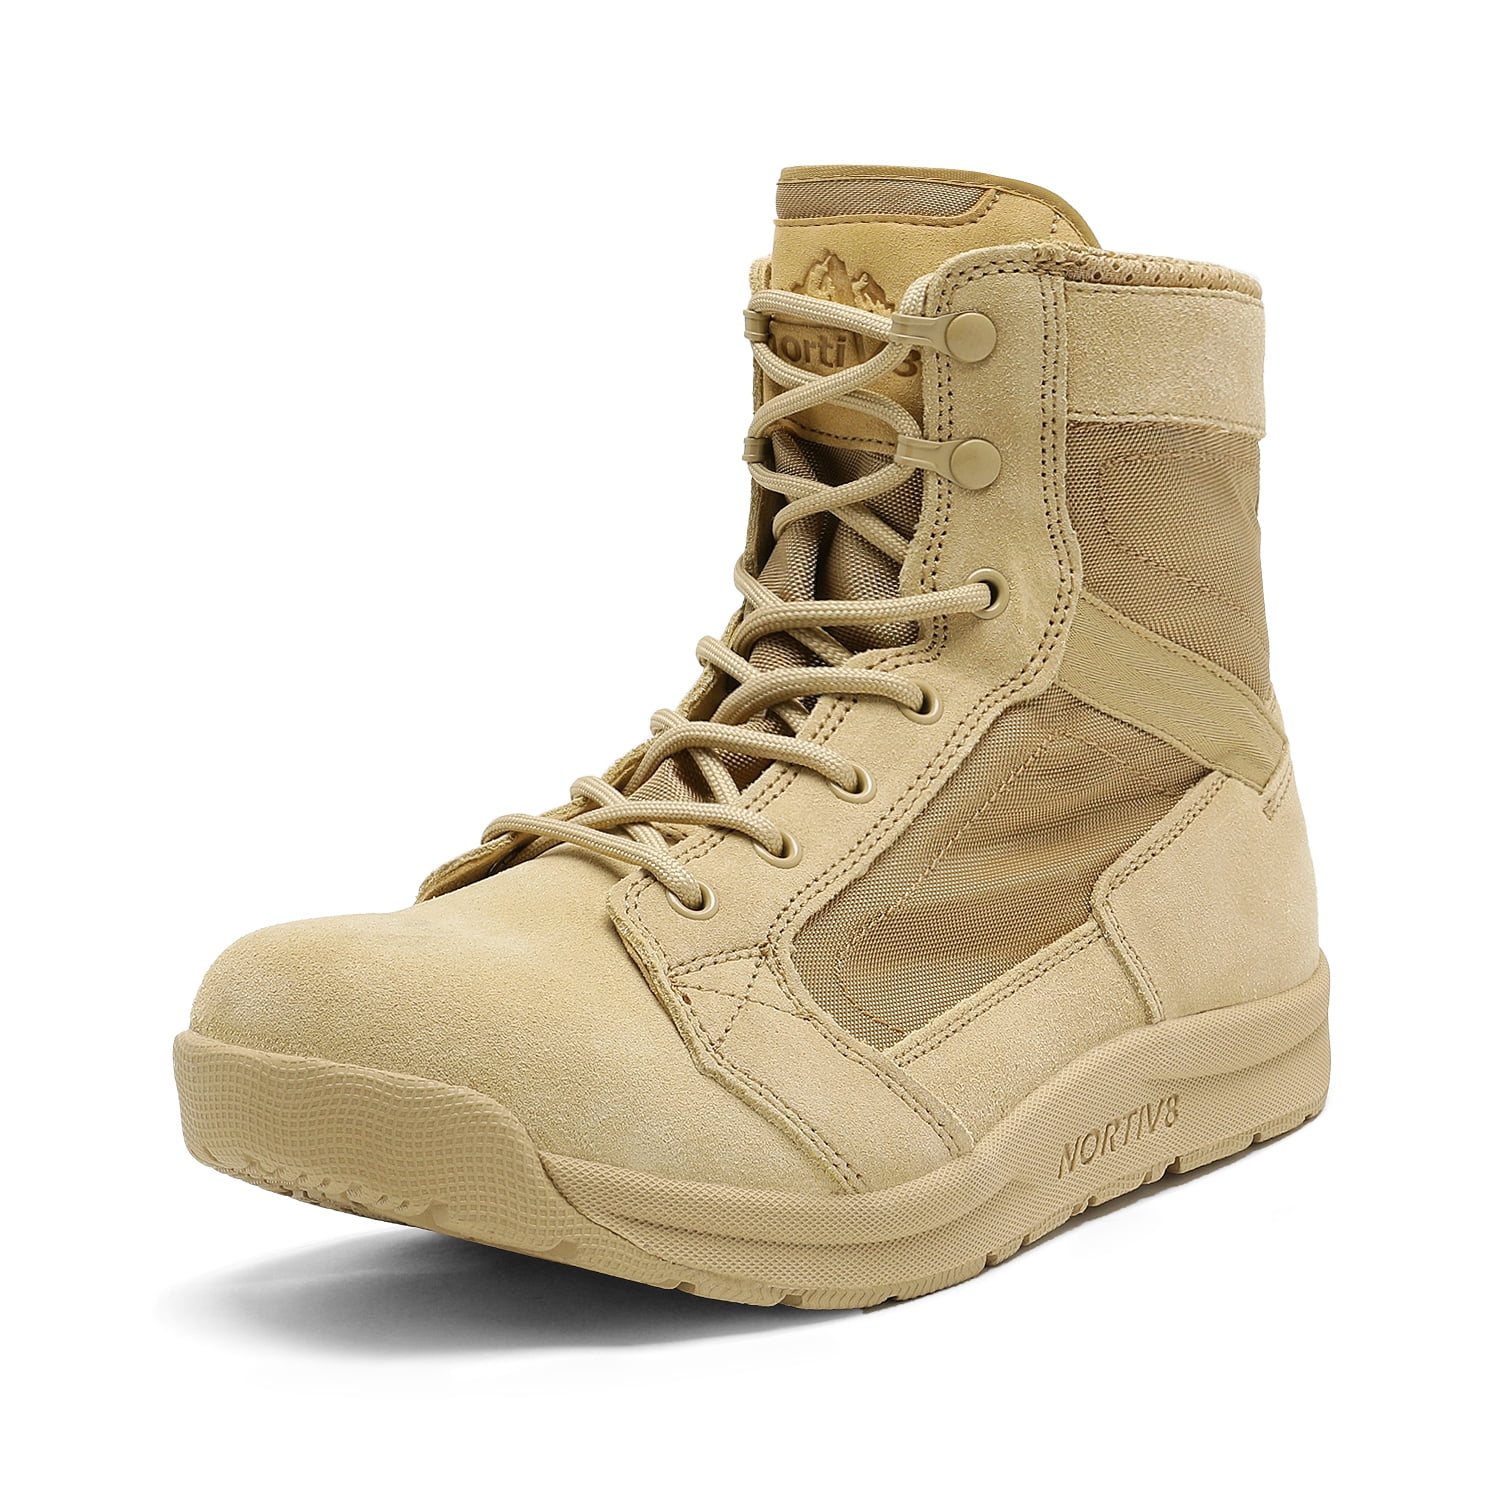 NORTIV 8 Mens Military Tactical Boots Lightweight Work Bootie 